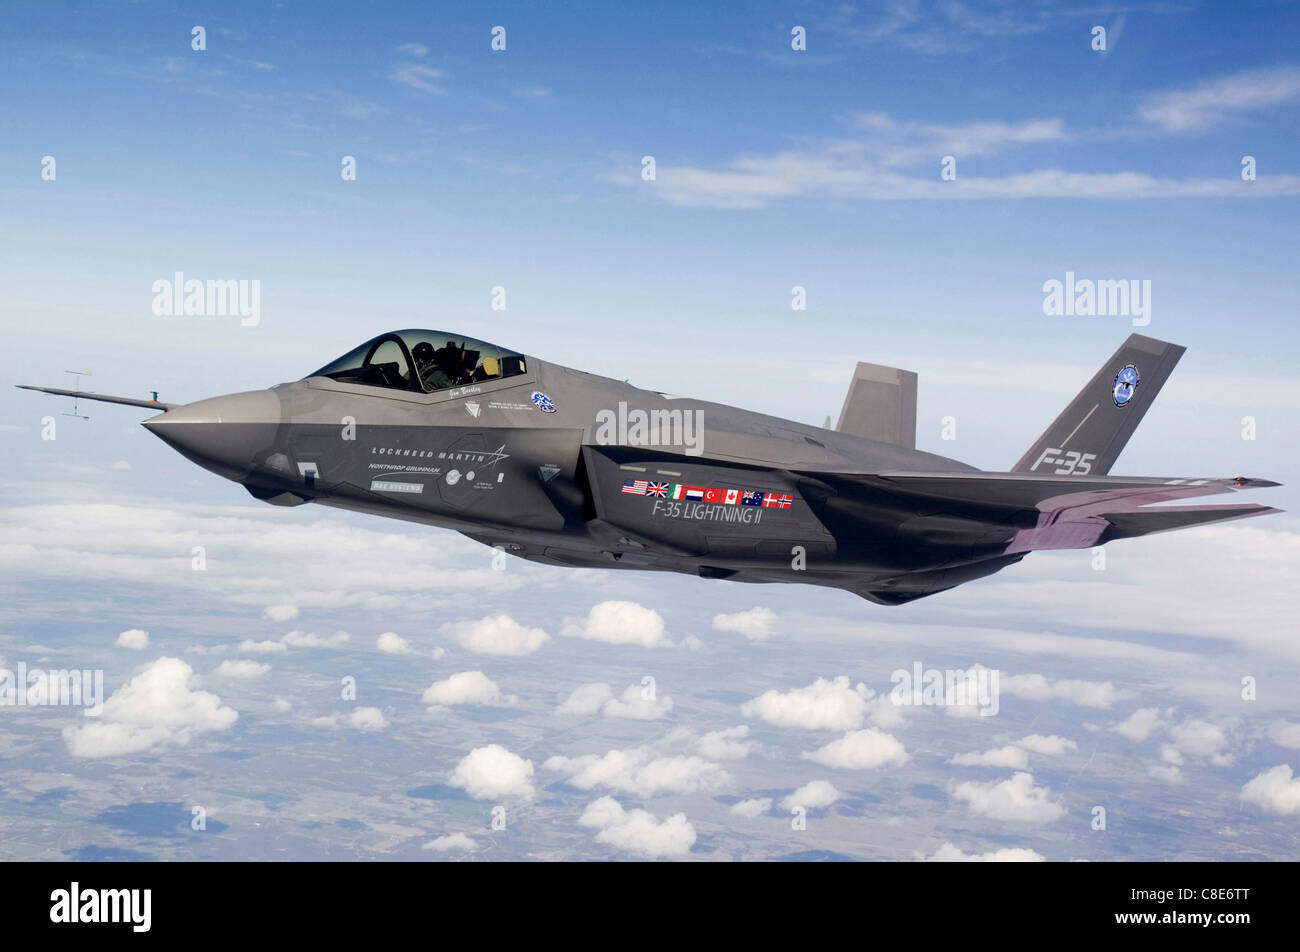 Over Fort Worth, Texas, an F-35 Lightning II test aircraft AA-1 undergoes a flight check. Stock Photo